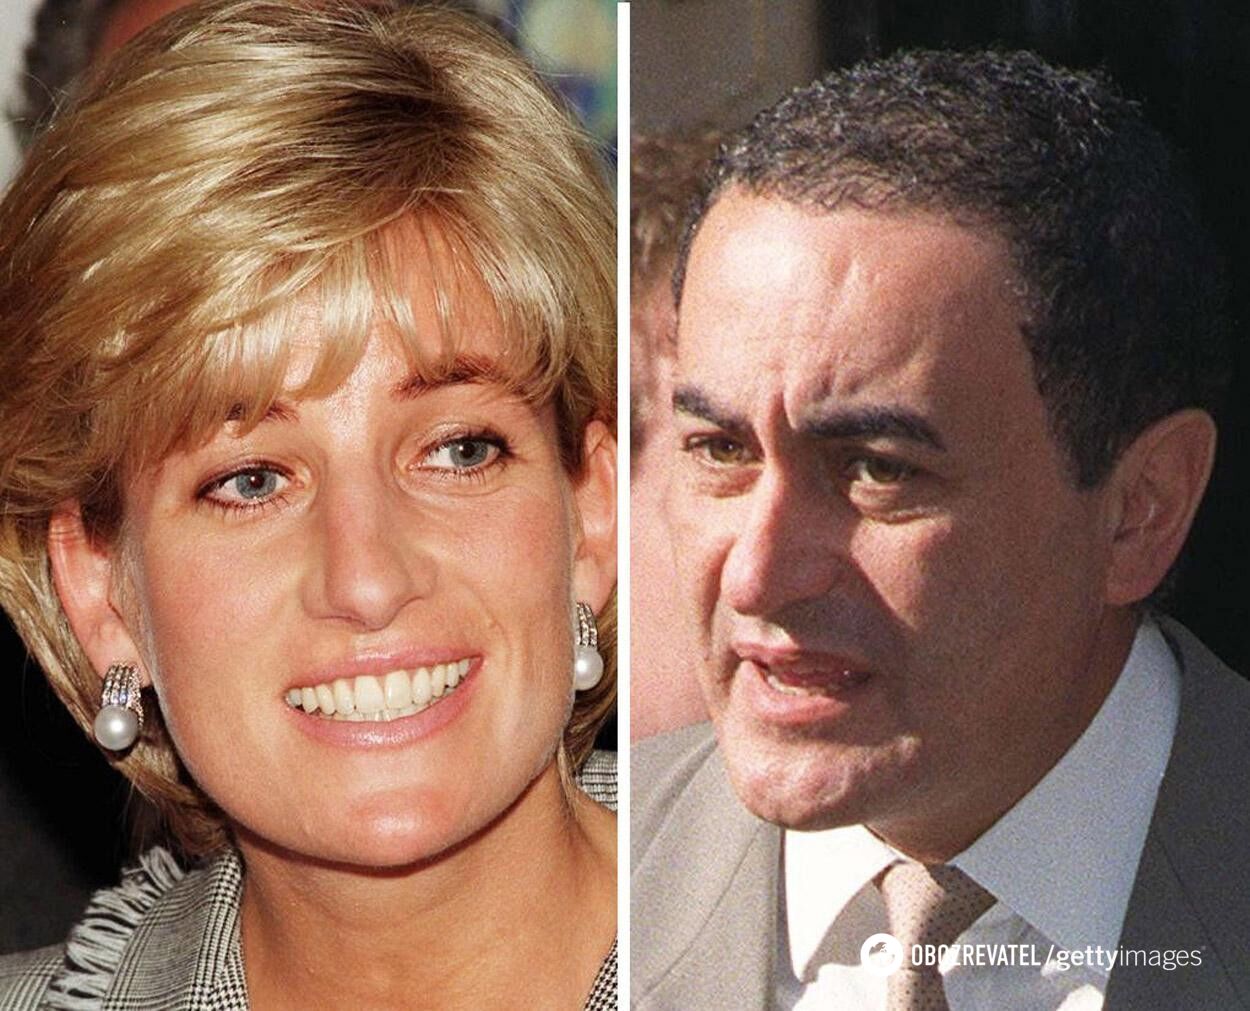 The tragic love story of Diana and Dodi Al-Fayed: what gift the princess gave her lover and why not everyone believes in their romance